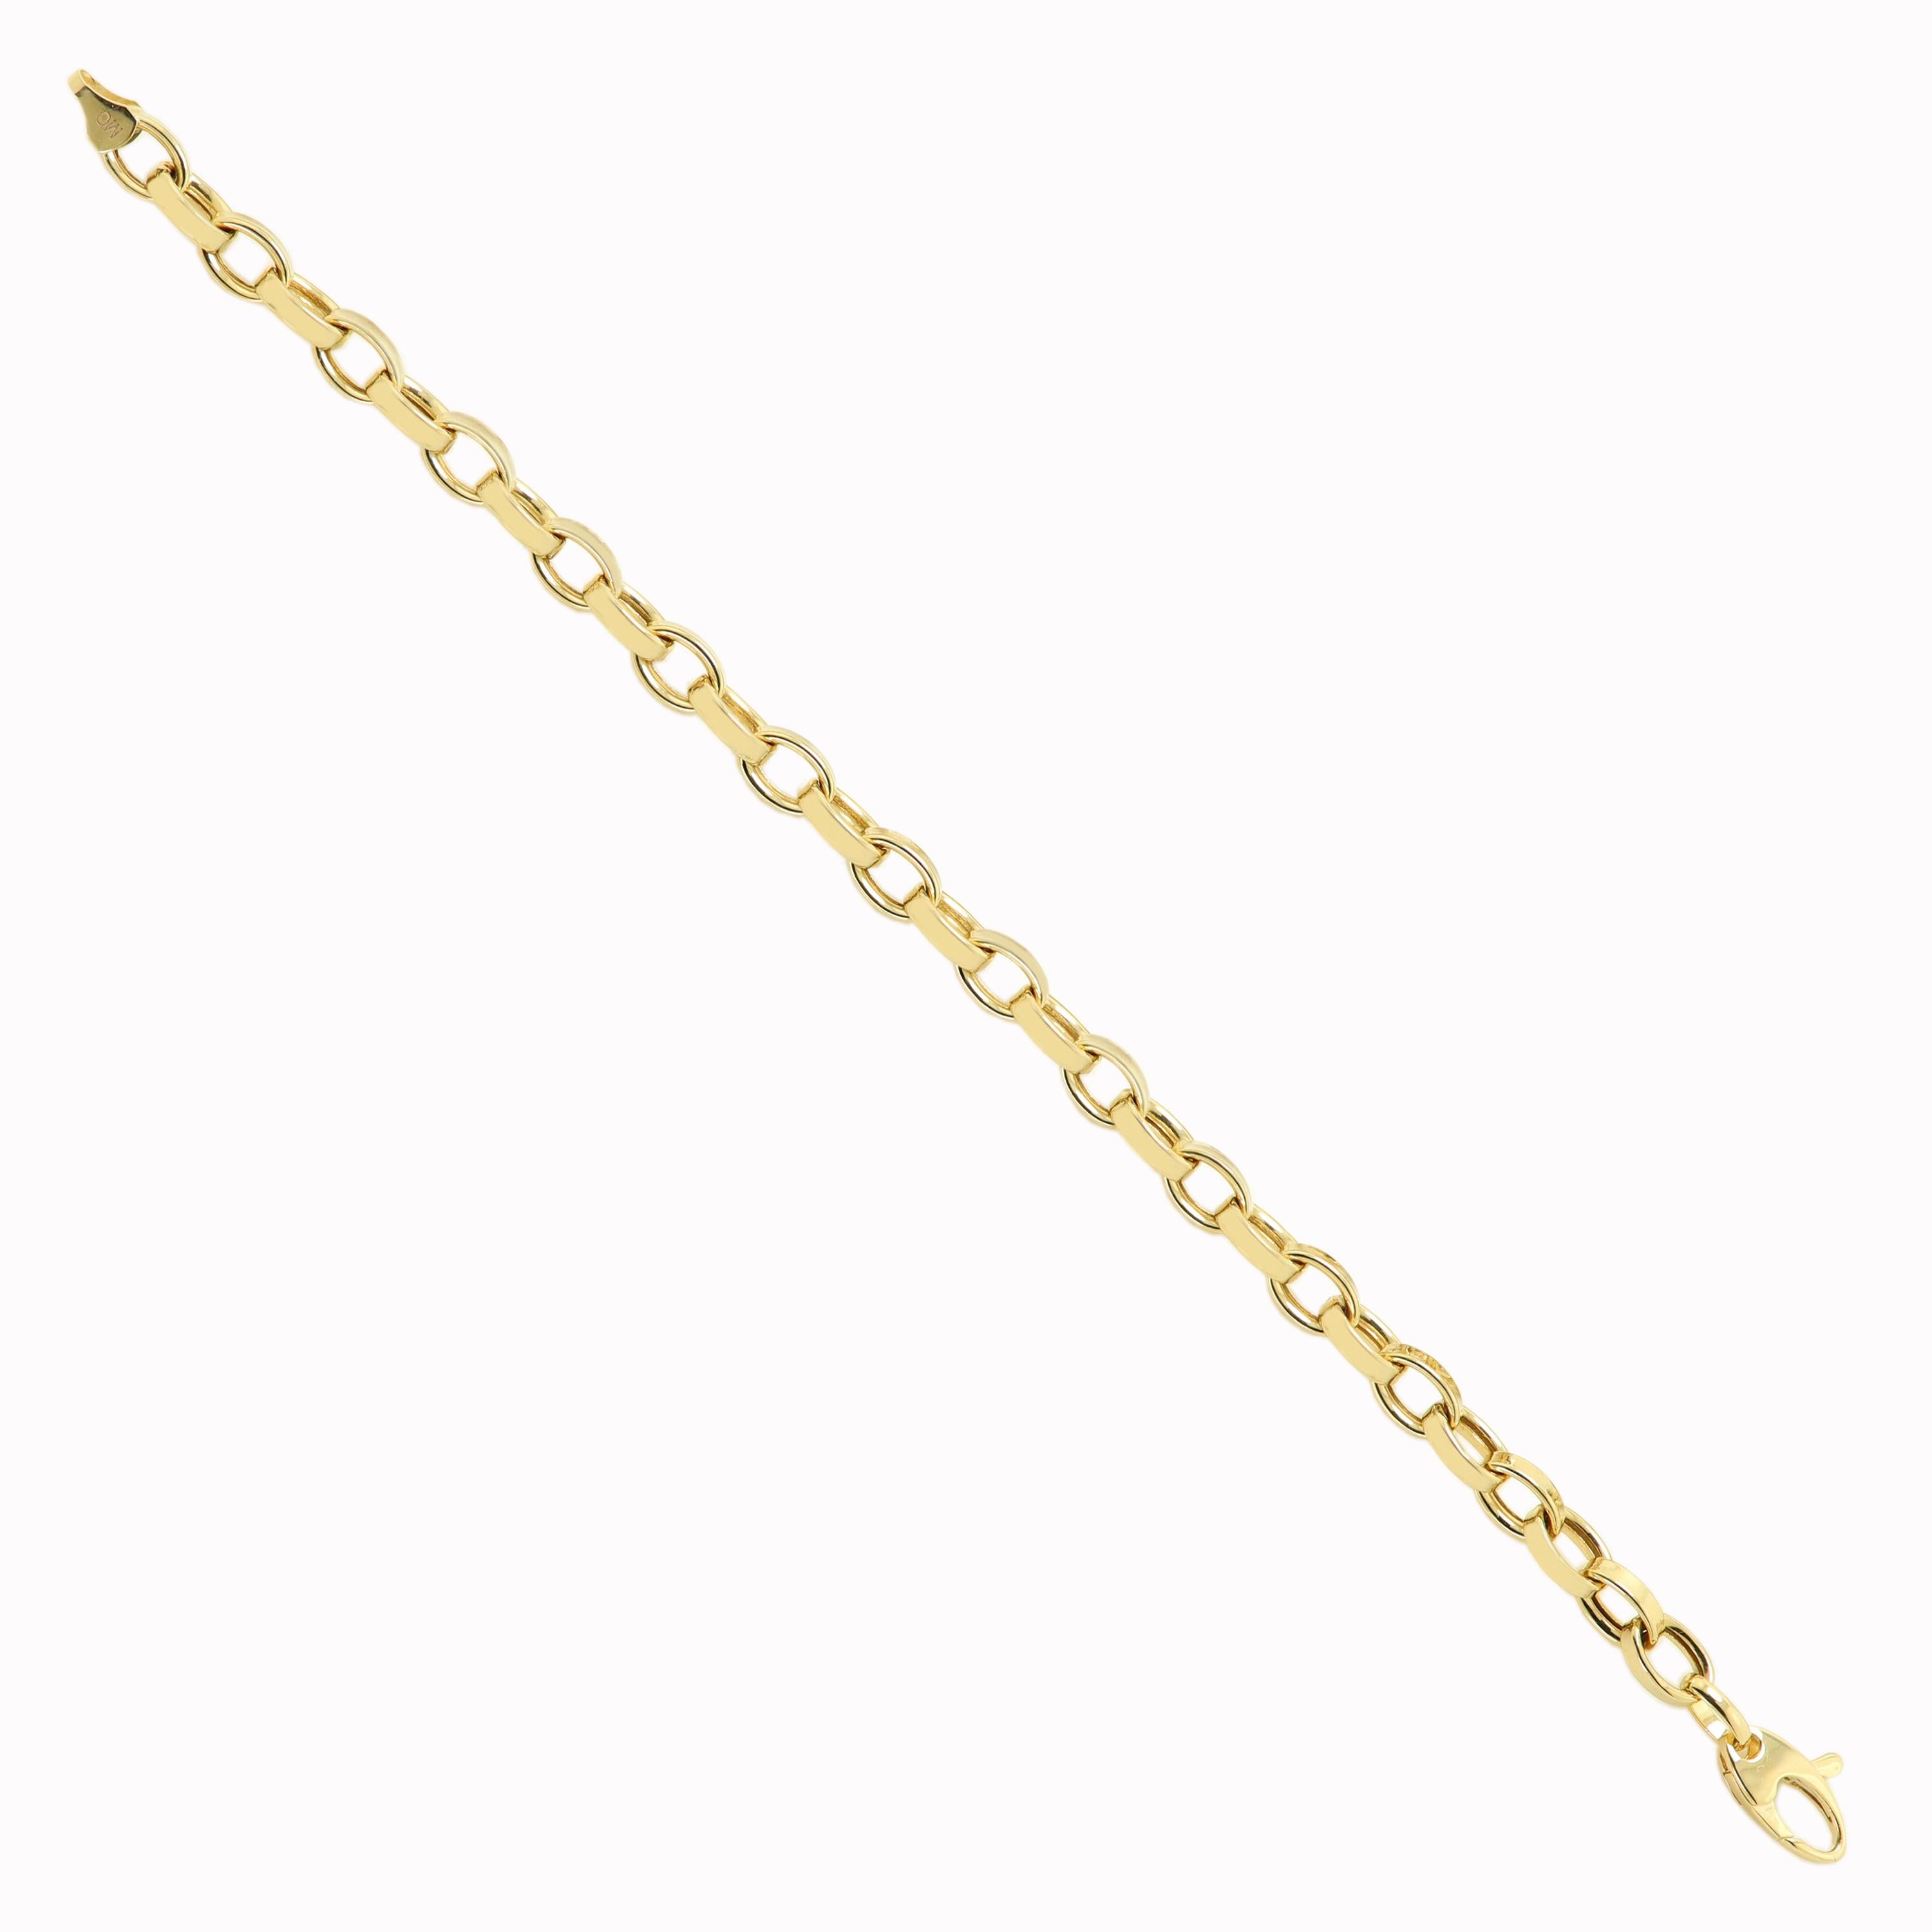 Beautiful Link Bracelet -  well made and very trendy look.
very elegant, Has a good balance between elegancy and trendy, not too bulky but not too thin either.
14k yellow gold 6.20 grams.
Length; 7.5' Inch
made In Italy.
approx individual link size